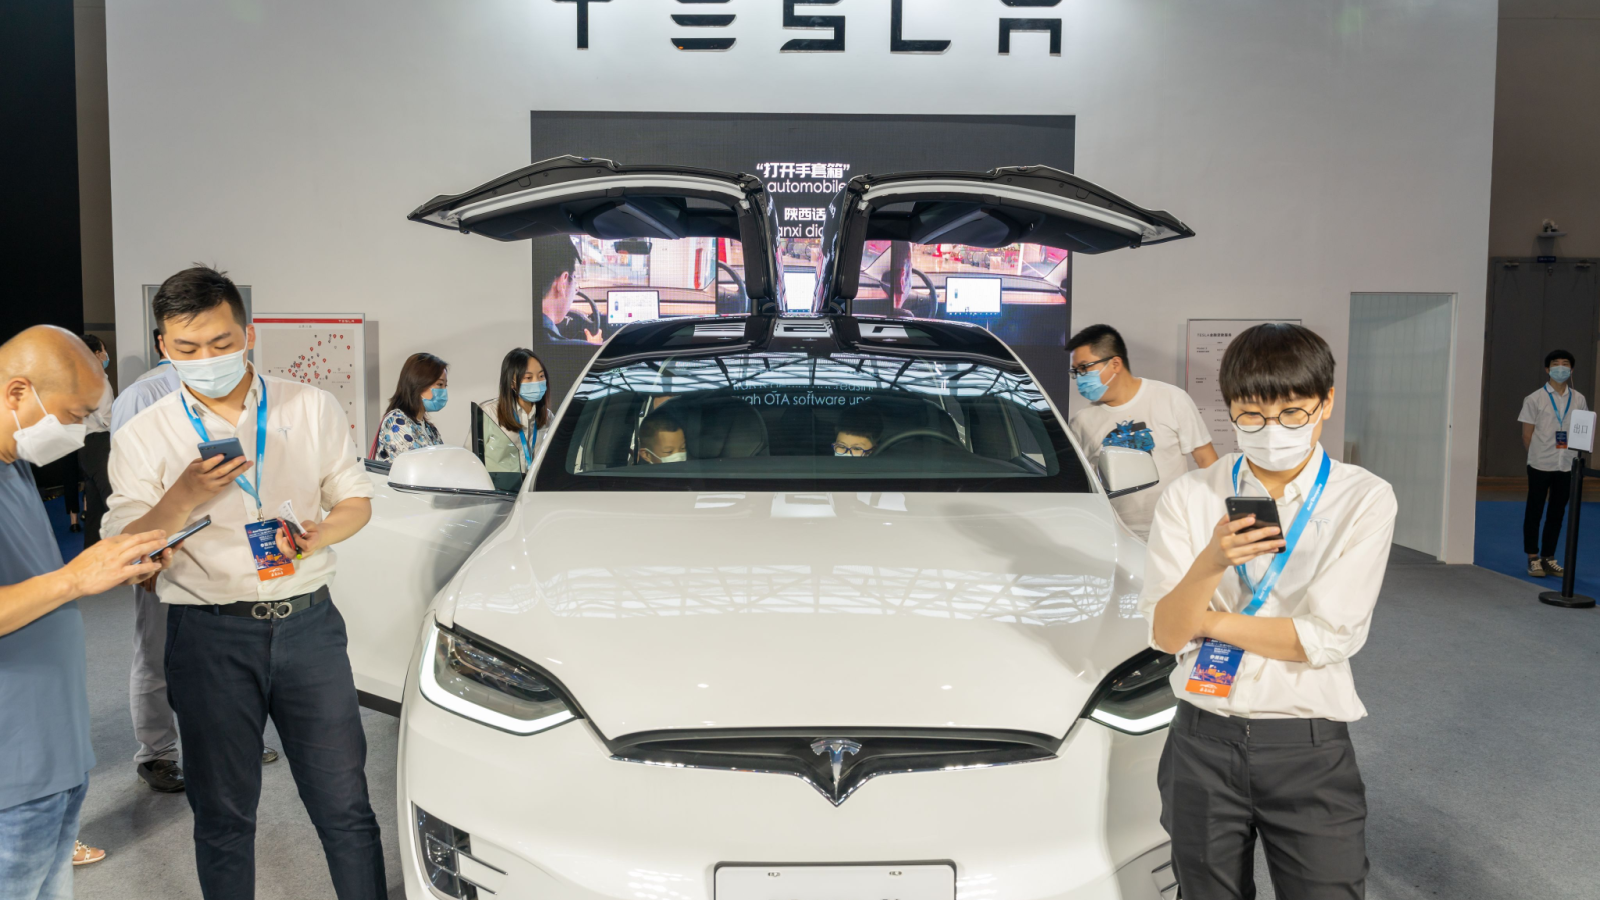 Tesla (TSLA stock) model X displayed in China auto expo during covid19 pandemic. Staff wearing face mask.